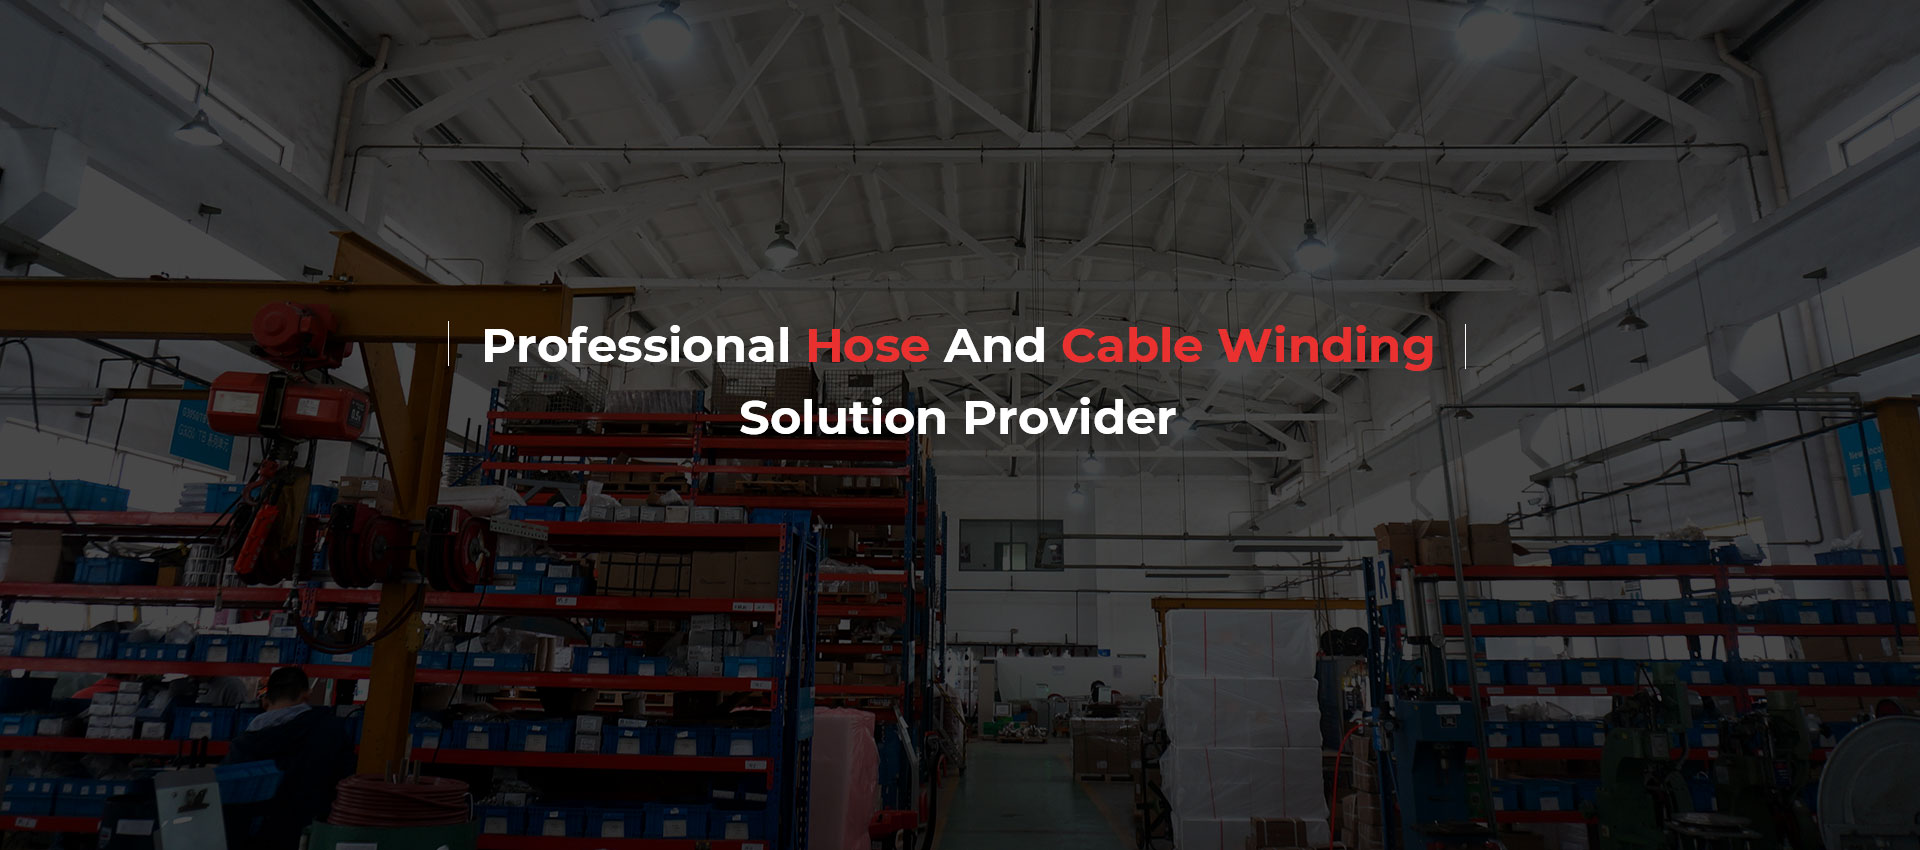 Professional Hose And Cable Winding Solution Provider